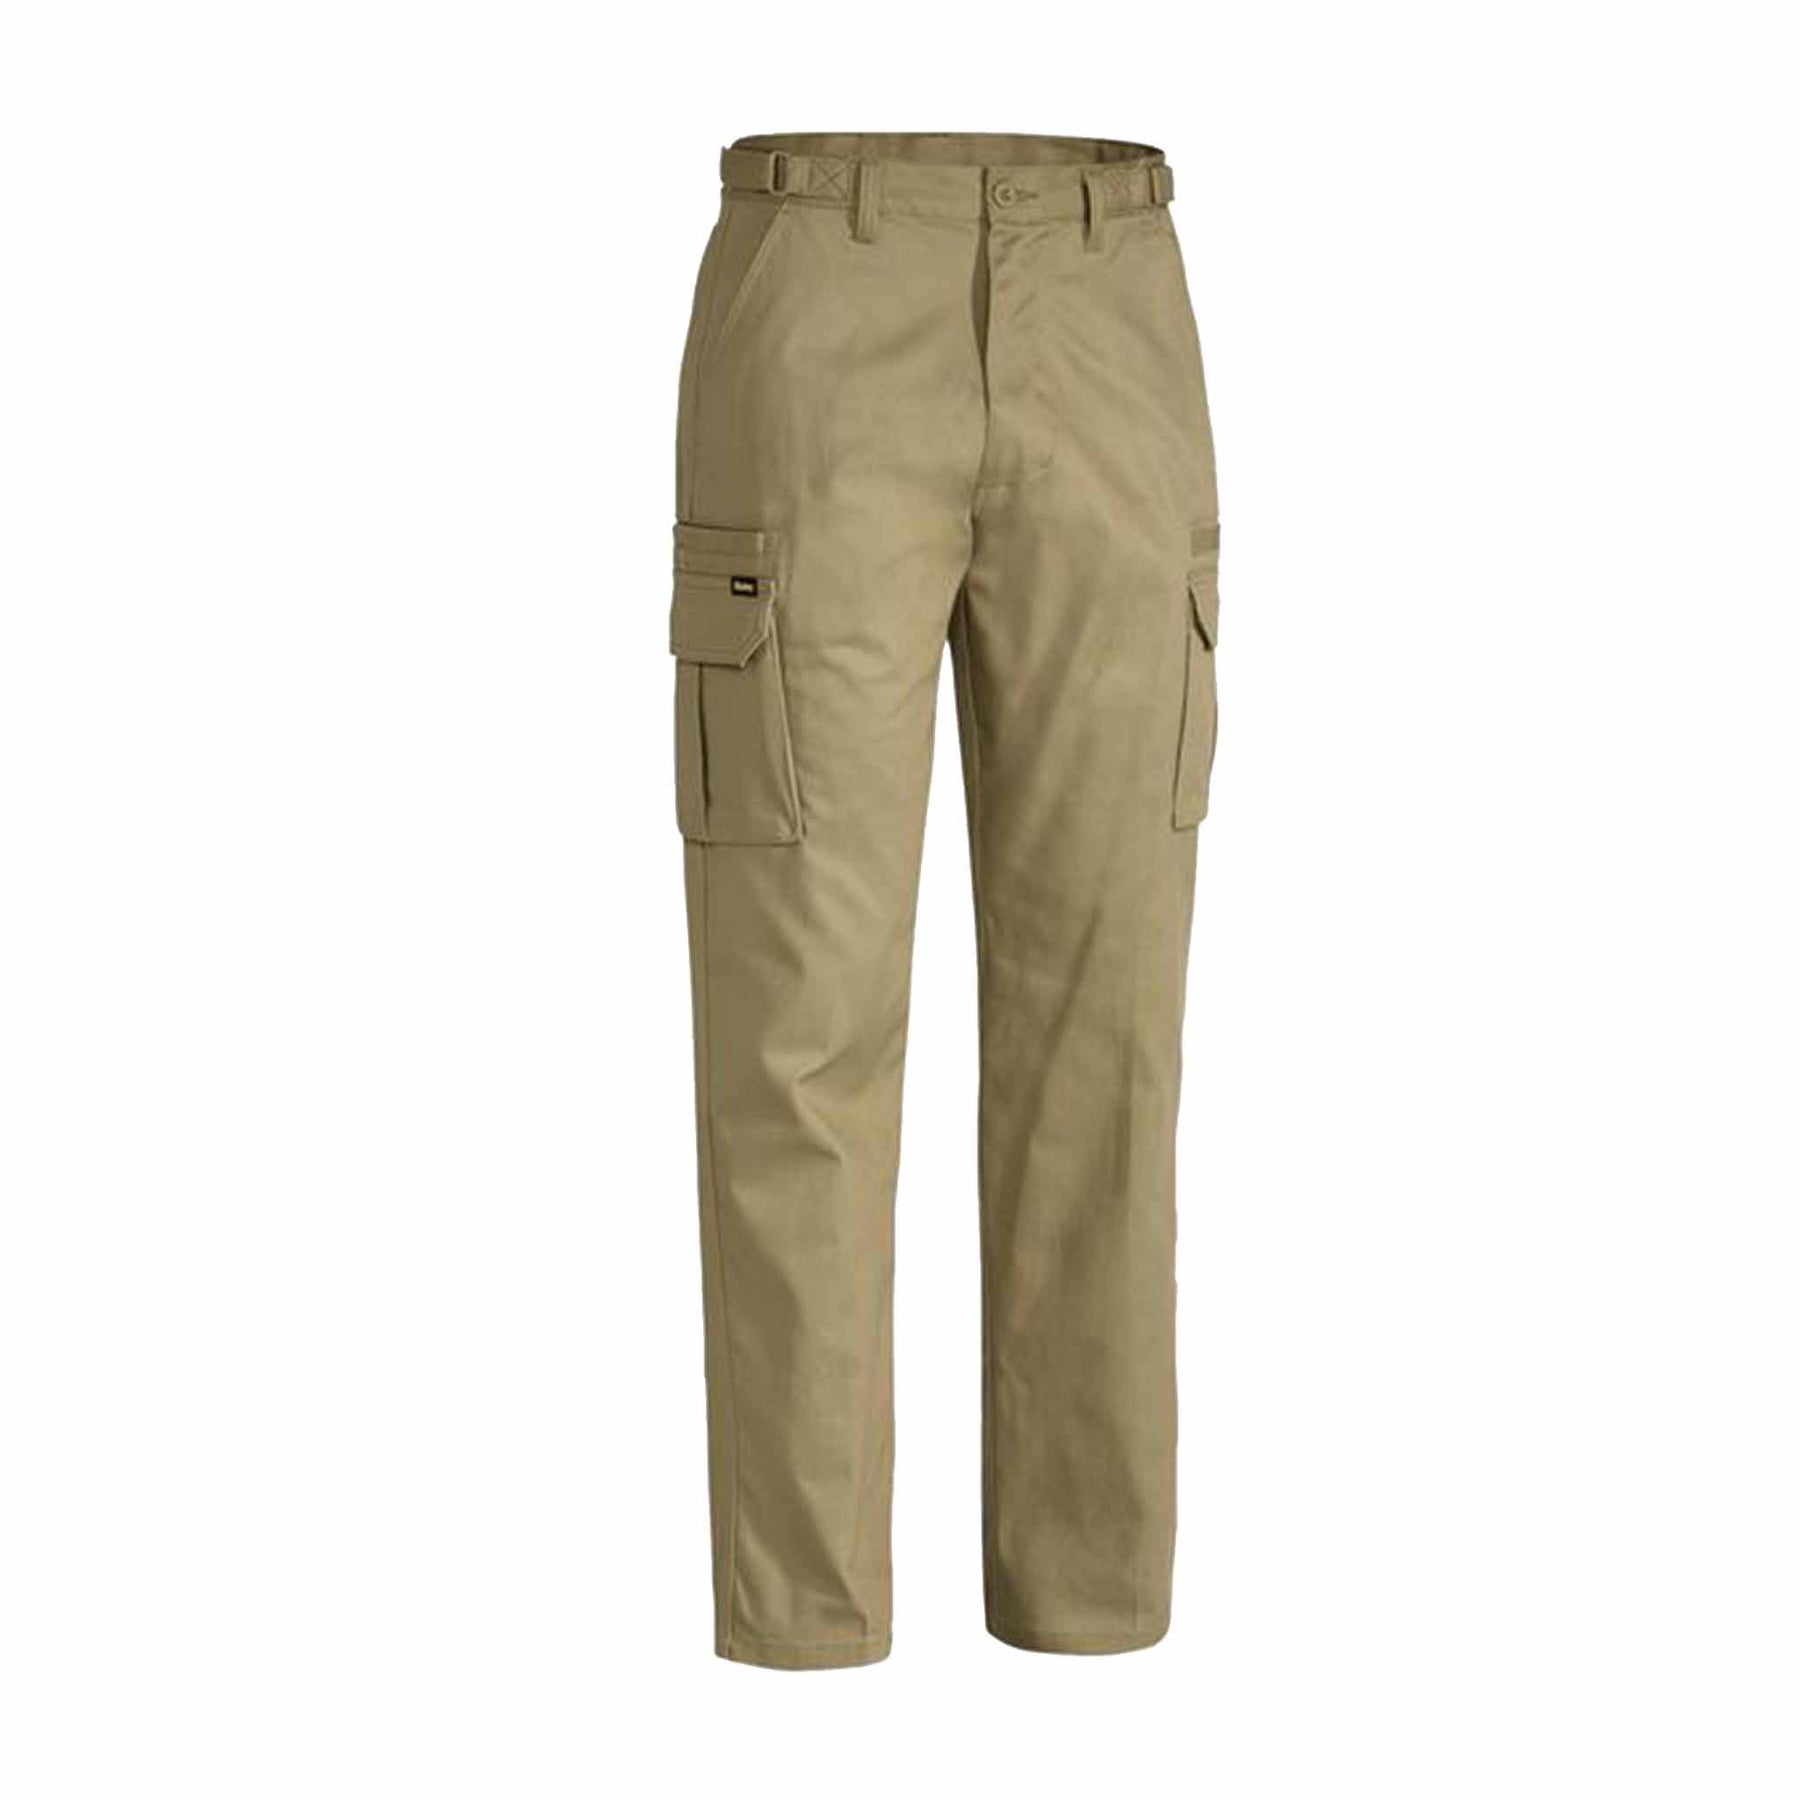 Men's Cargo Pants Cargo Trousers Hiking Pants 8 Pocket Plain Comfort  Breathable Outdoor Daily Going out 100% Cotton Fashion Casual Gray Green  Camouflage Black 2024 - $32.99